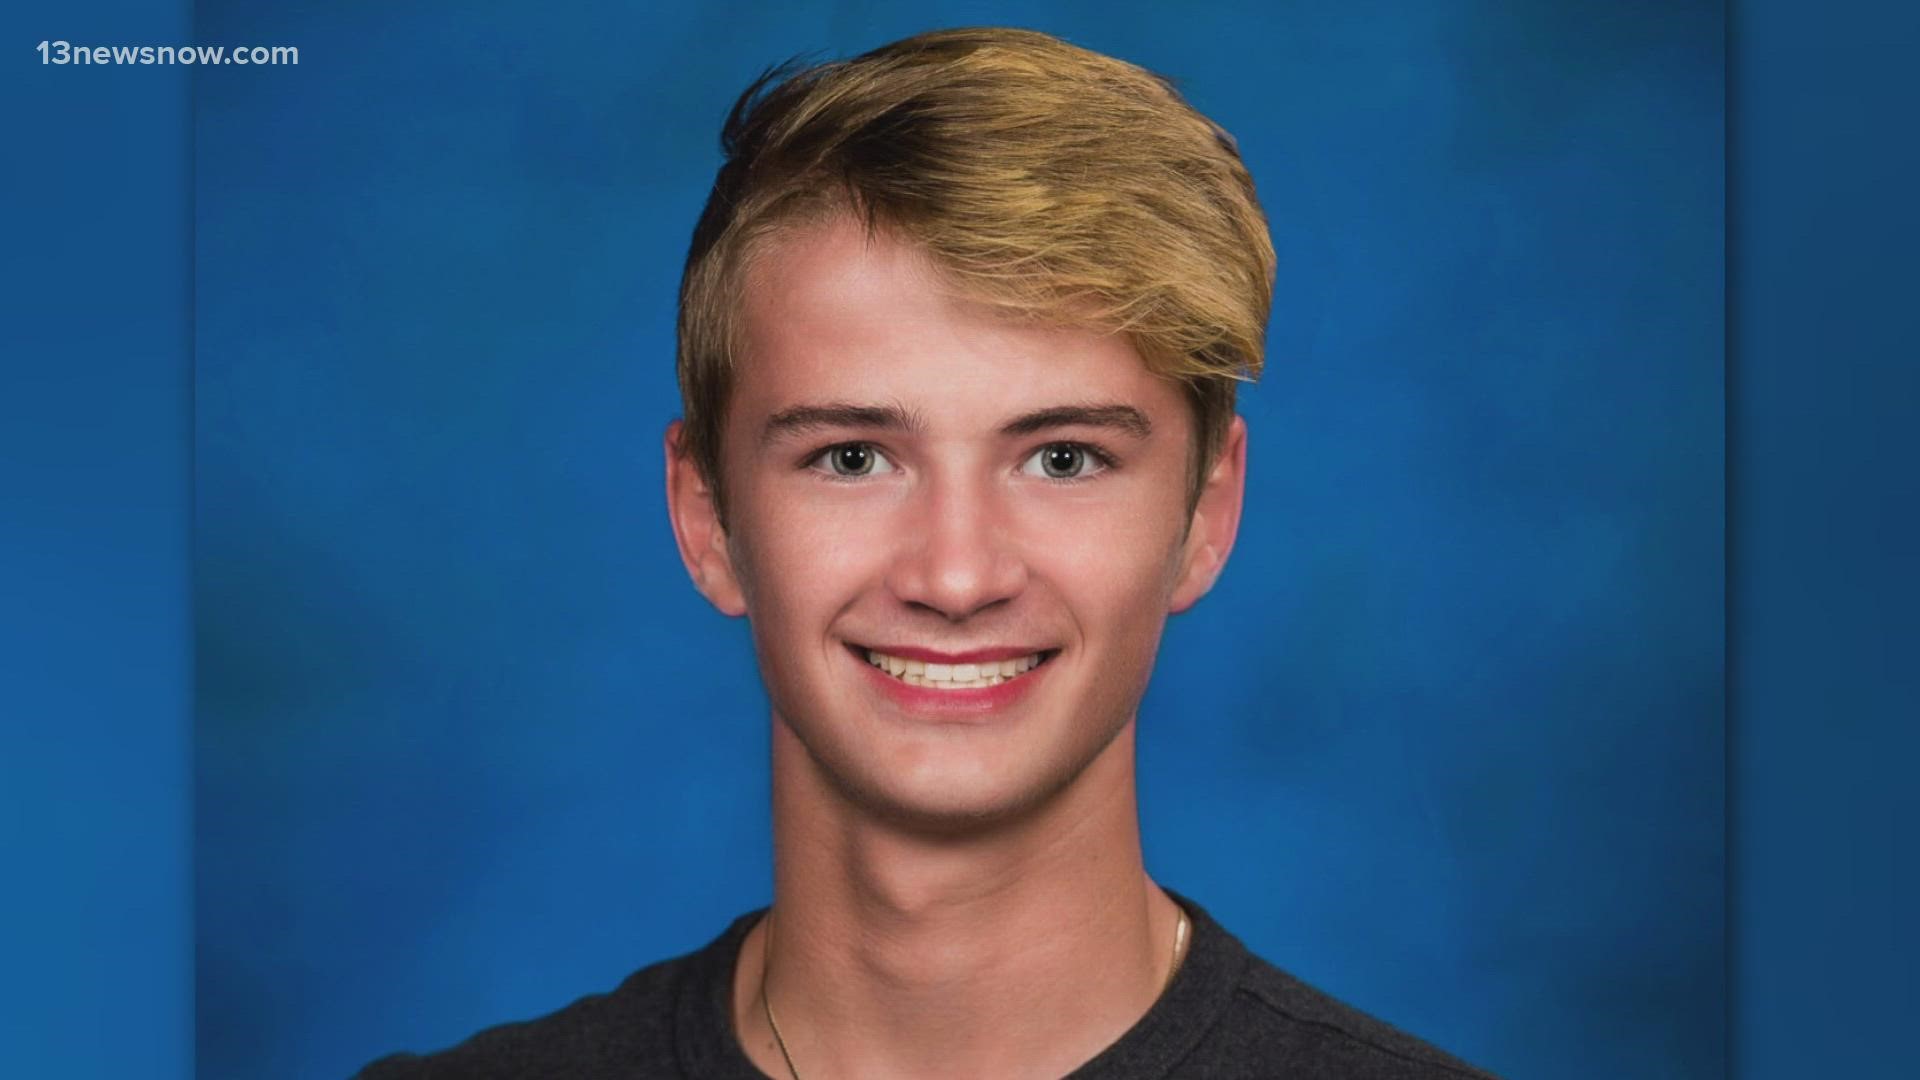 An unbearable loss has inspired something great in Yorktown. One mother is determined to honor her late son by educating others about teen driving safety.